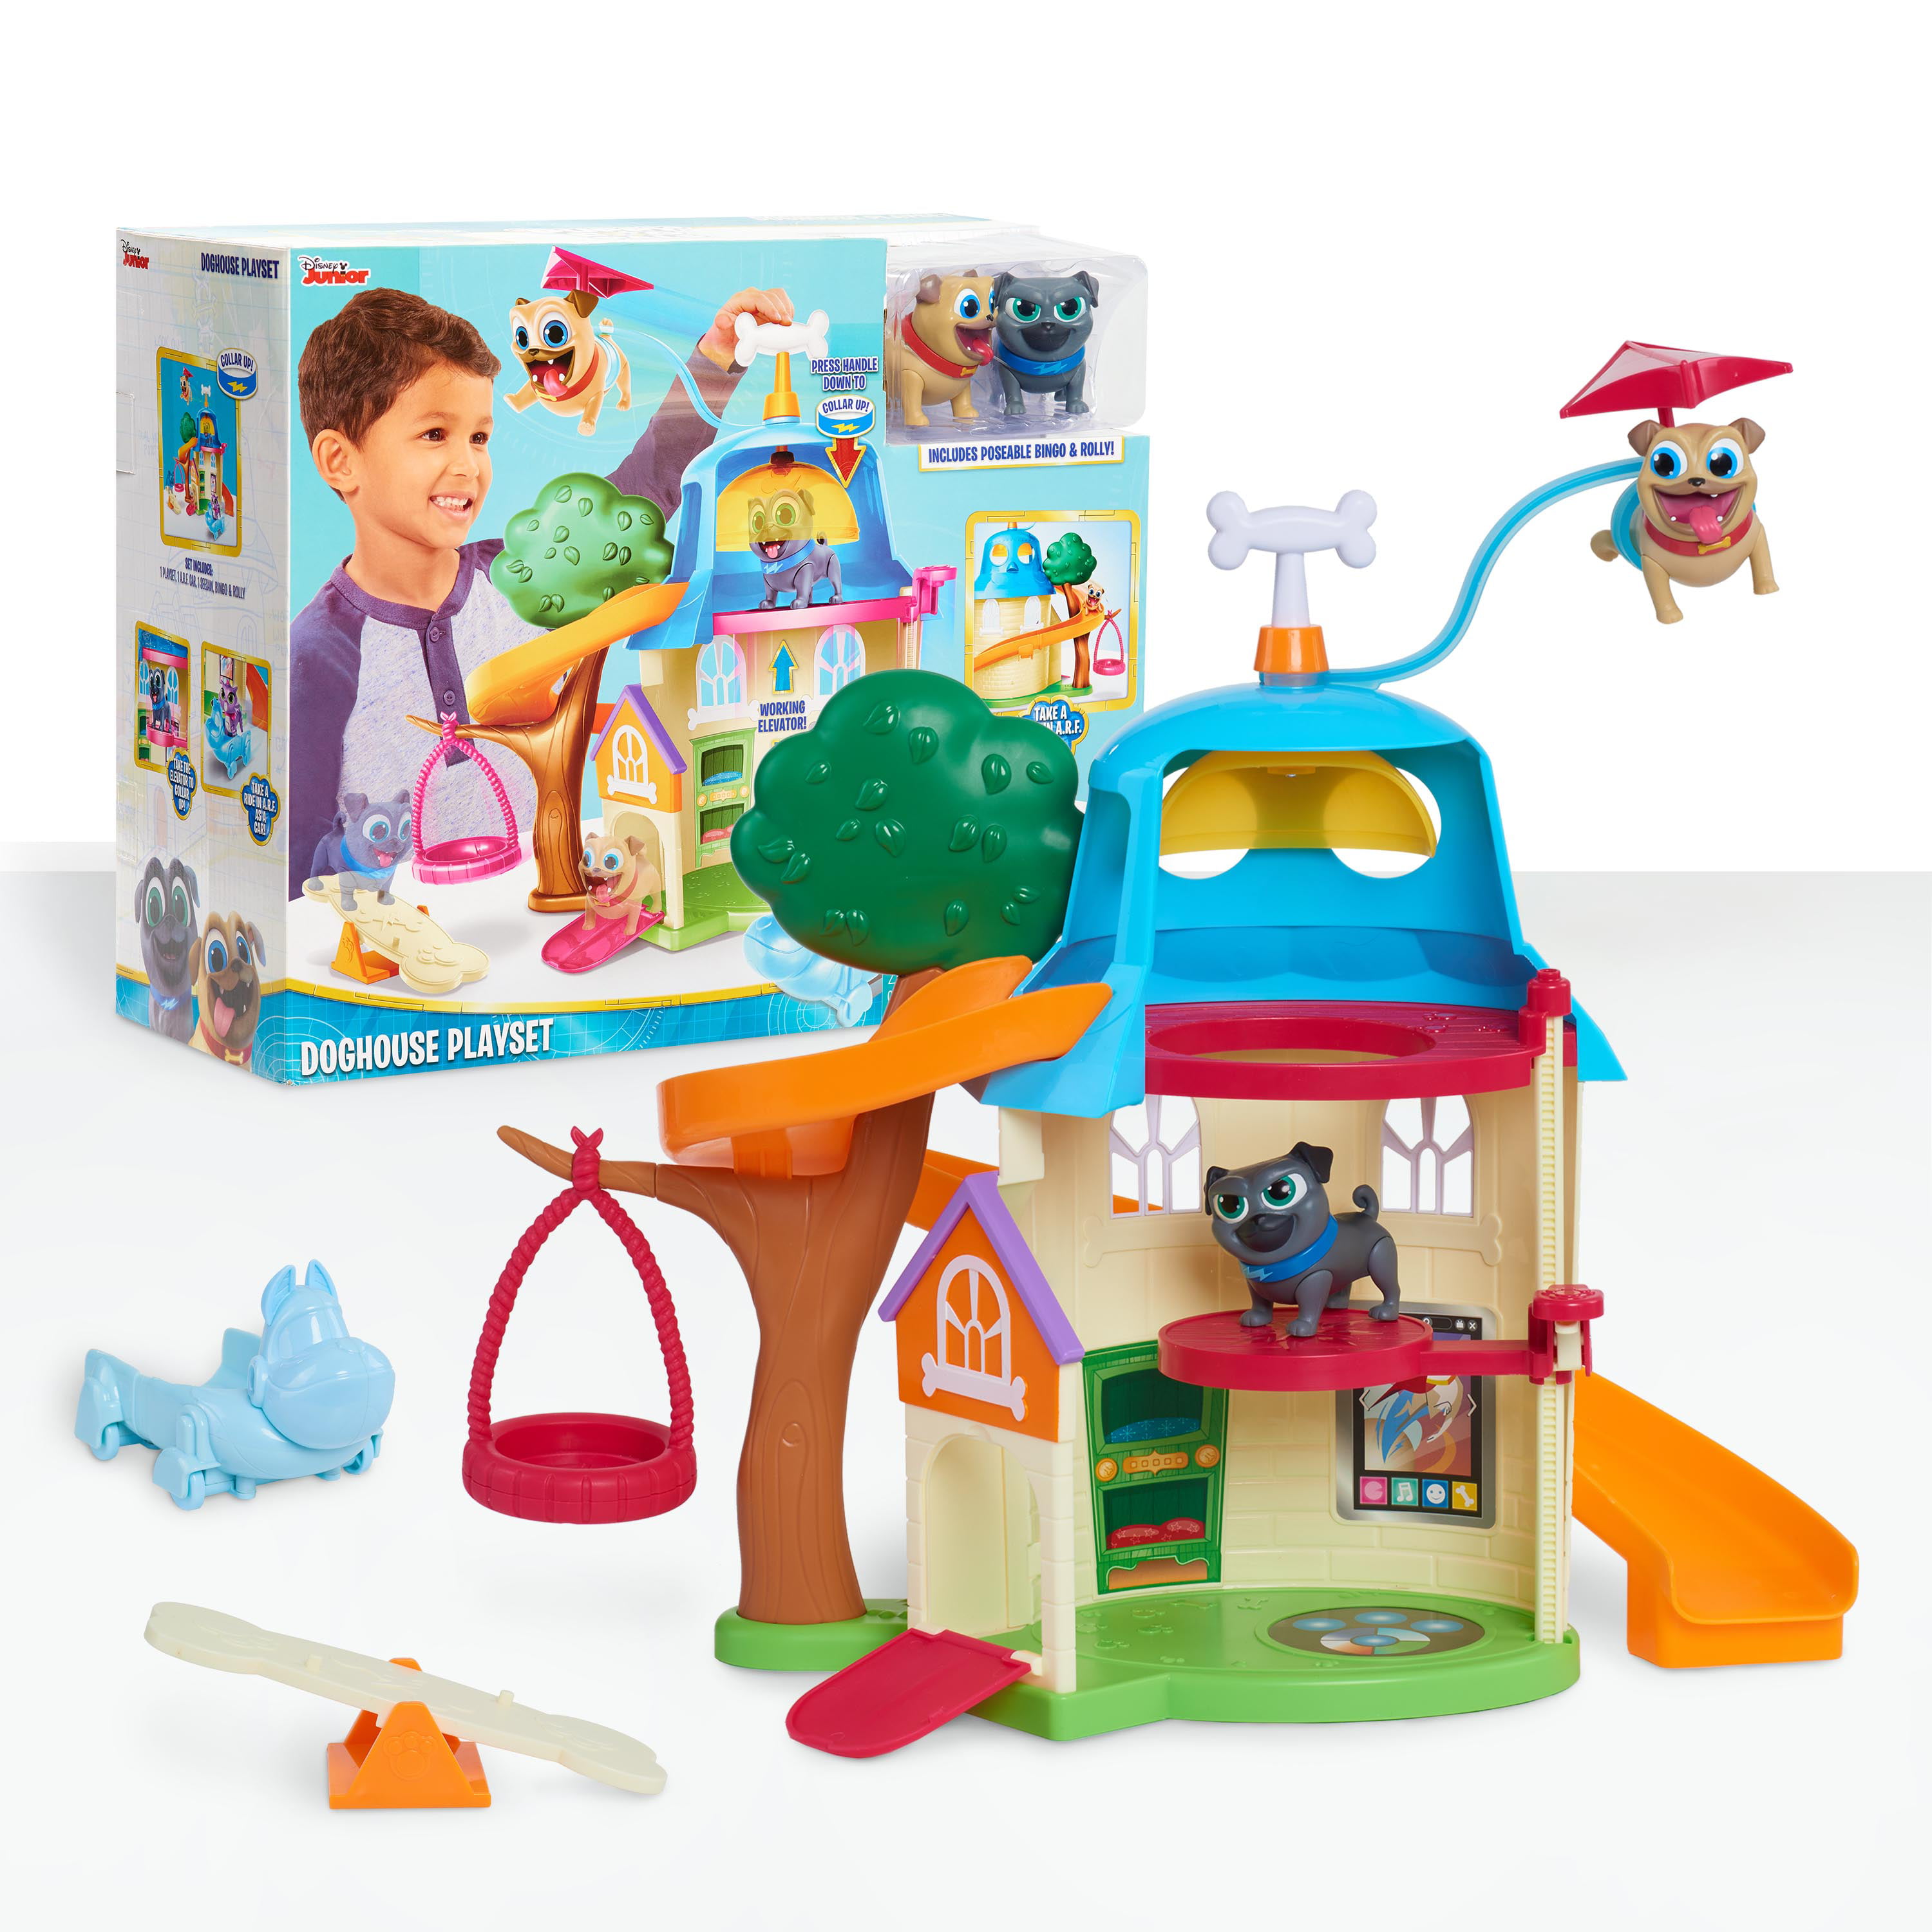 Puppy Dog Pals Doghouse Playset, Ages 